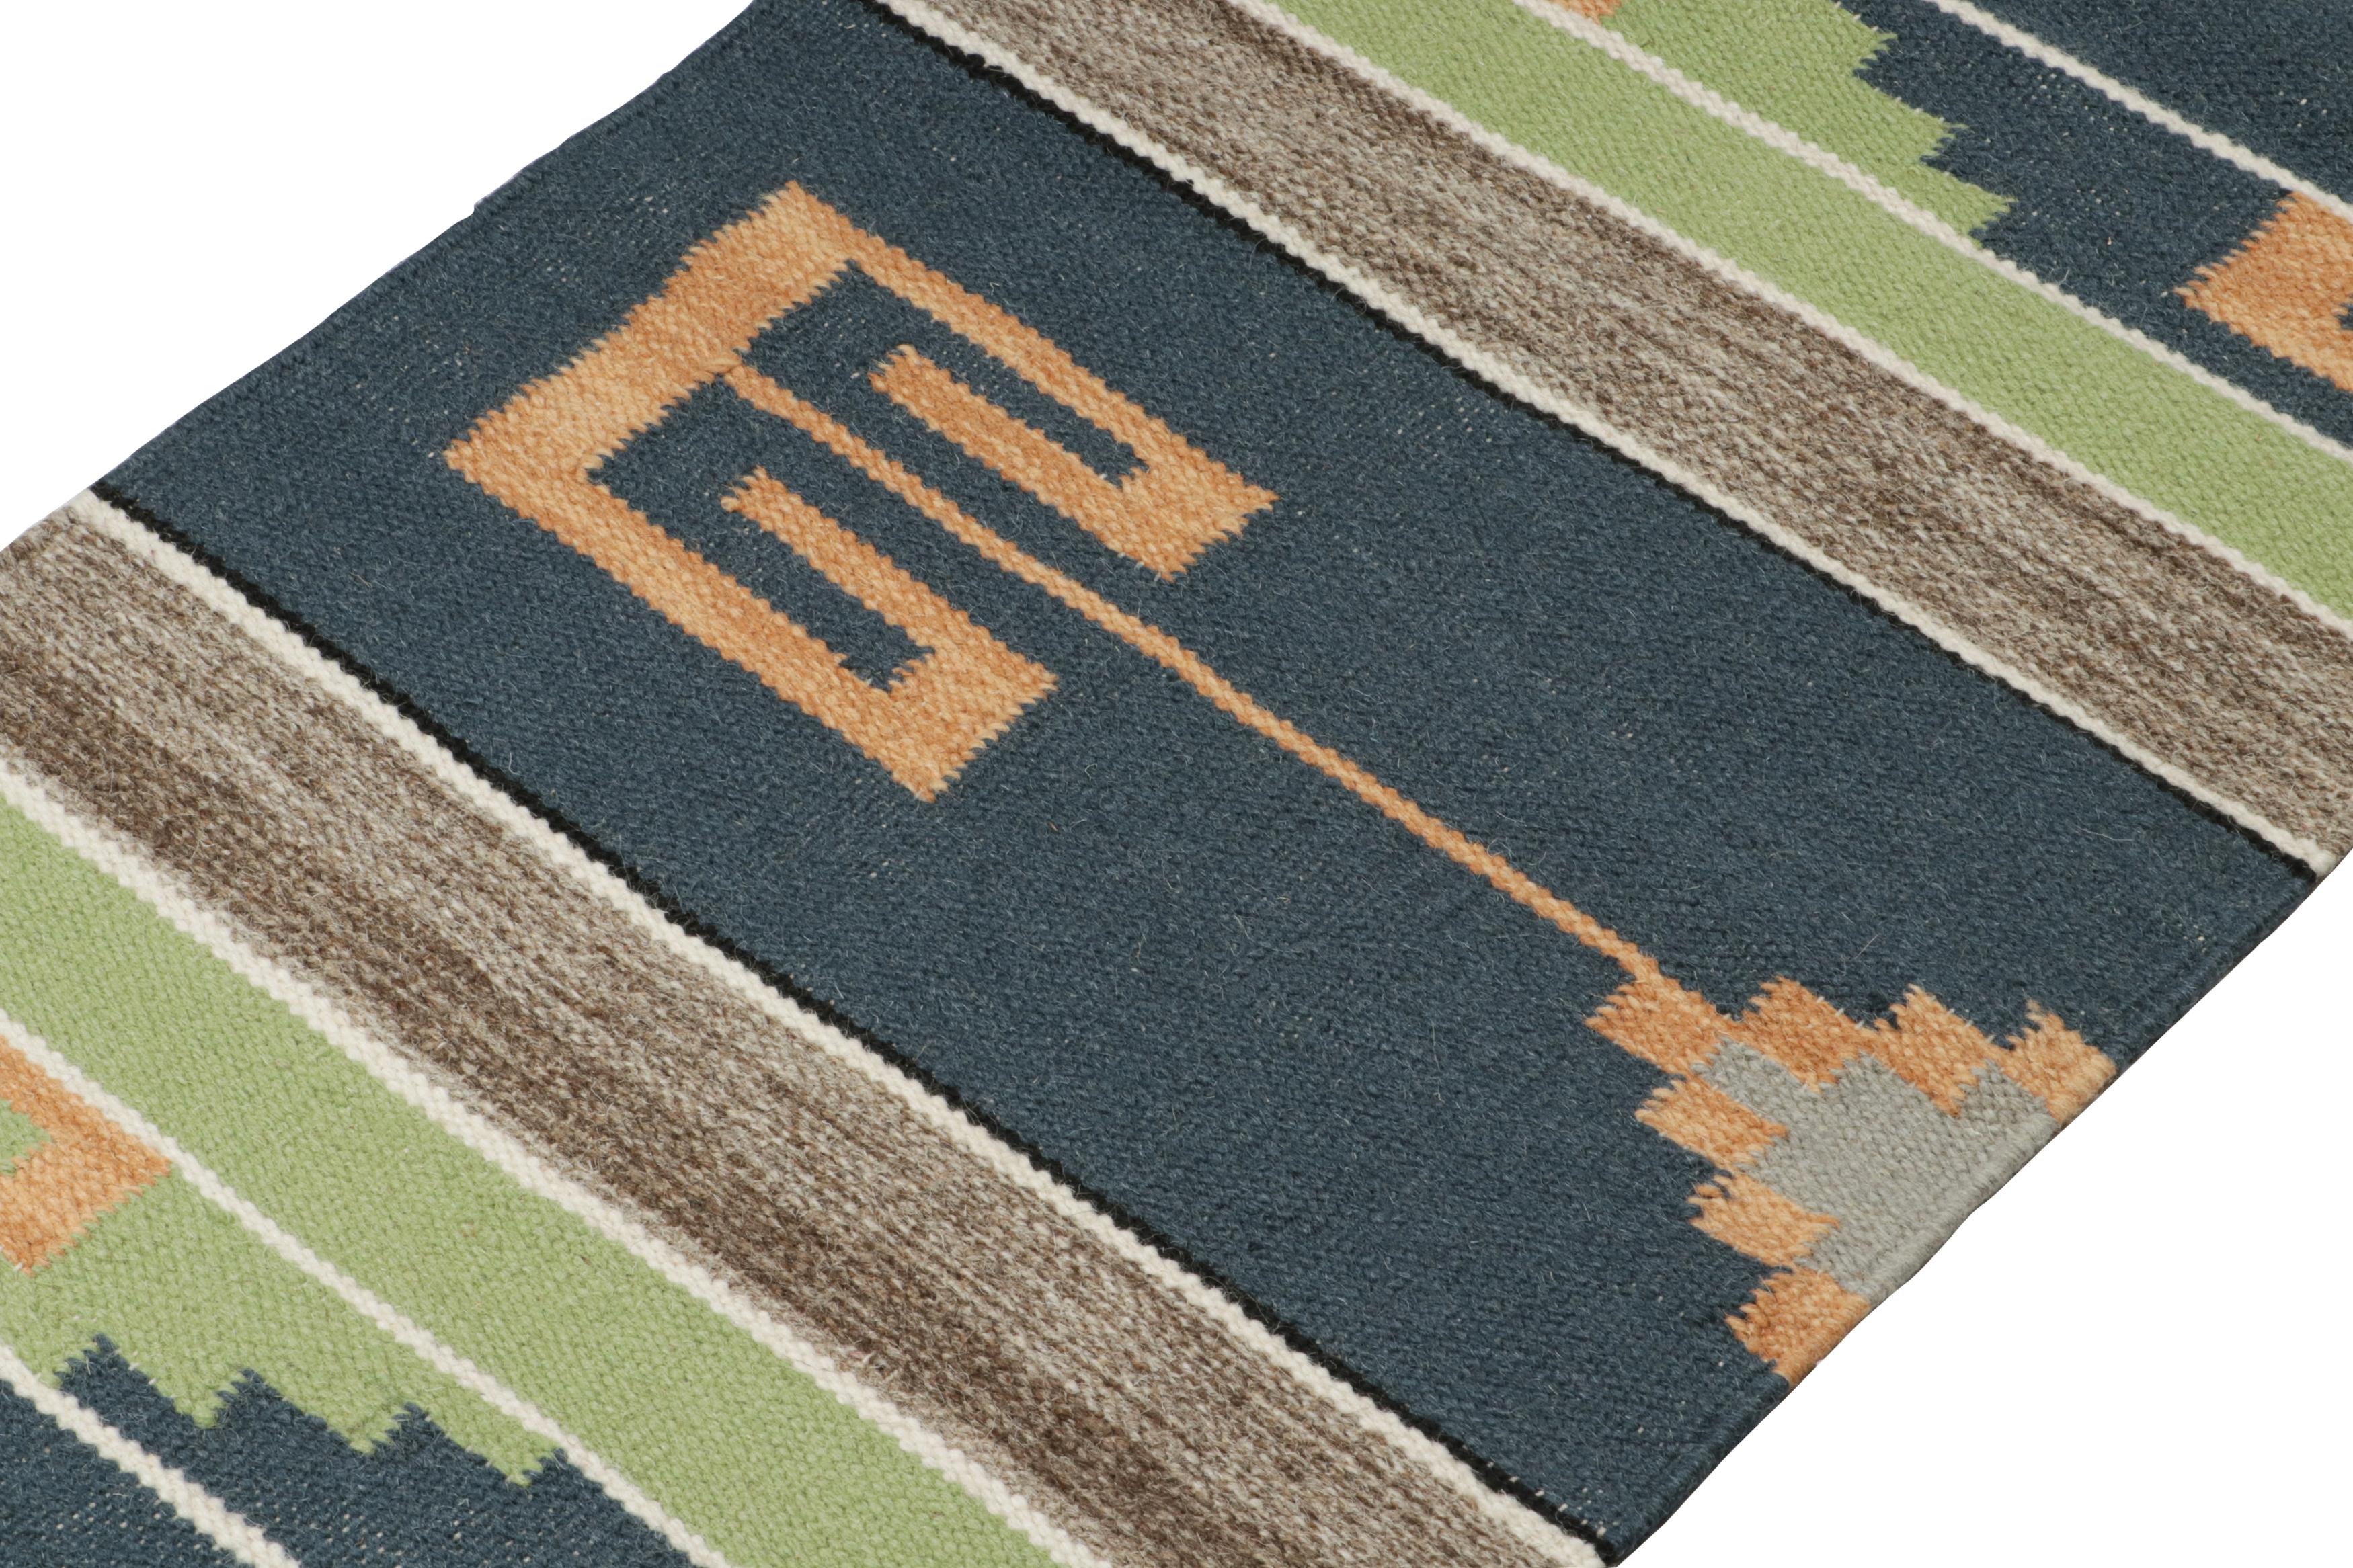 Indian Rug & Kilim’s Tribal style Kilim in Blue, Gold, Green Patterns For Sale